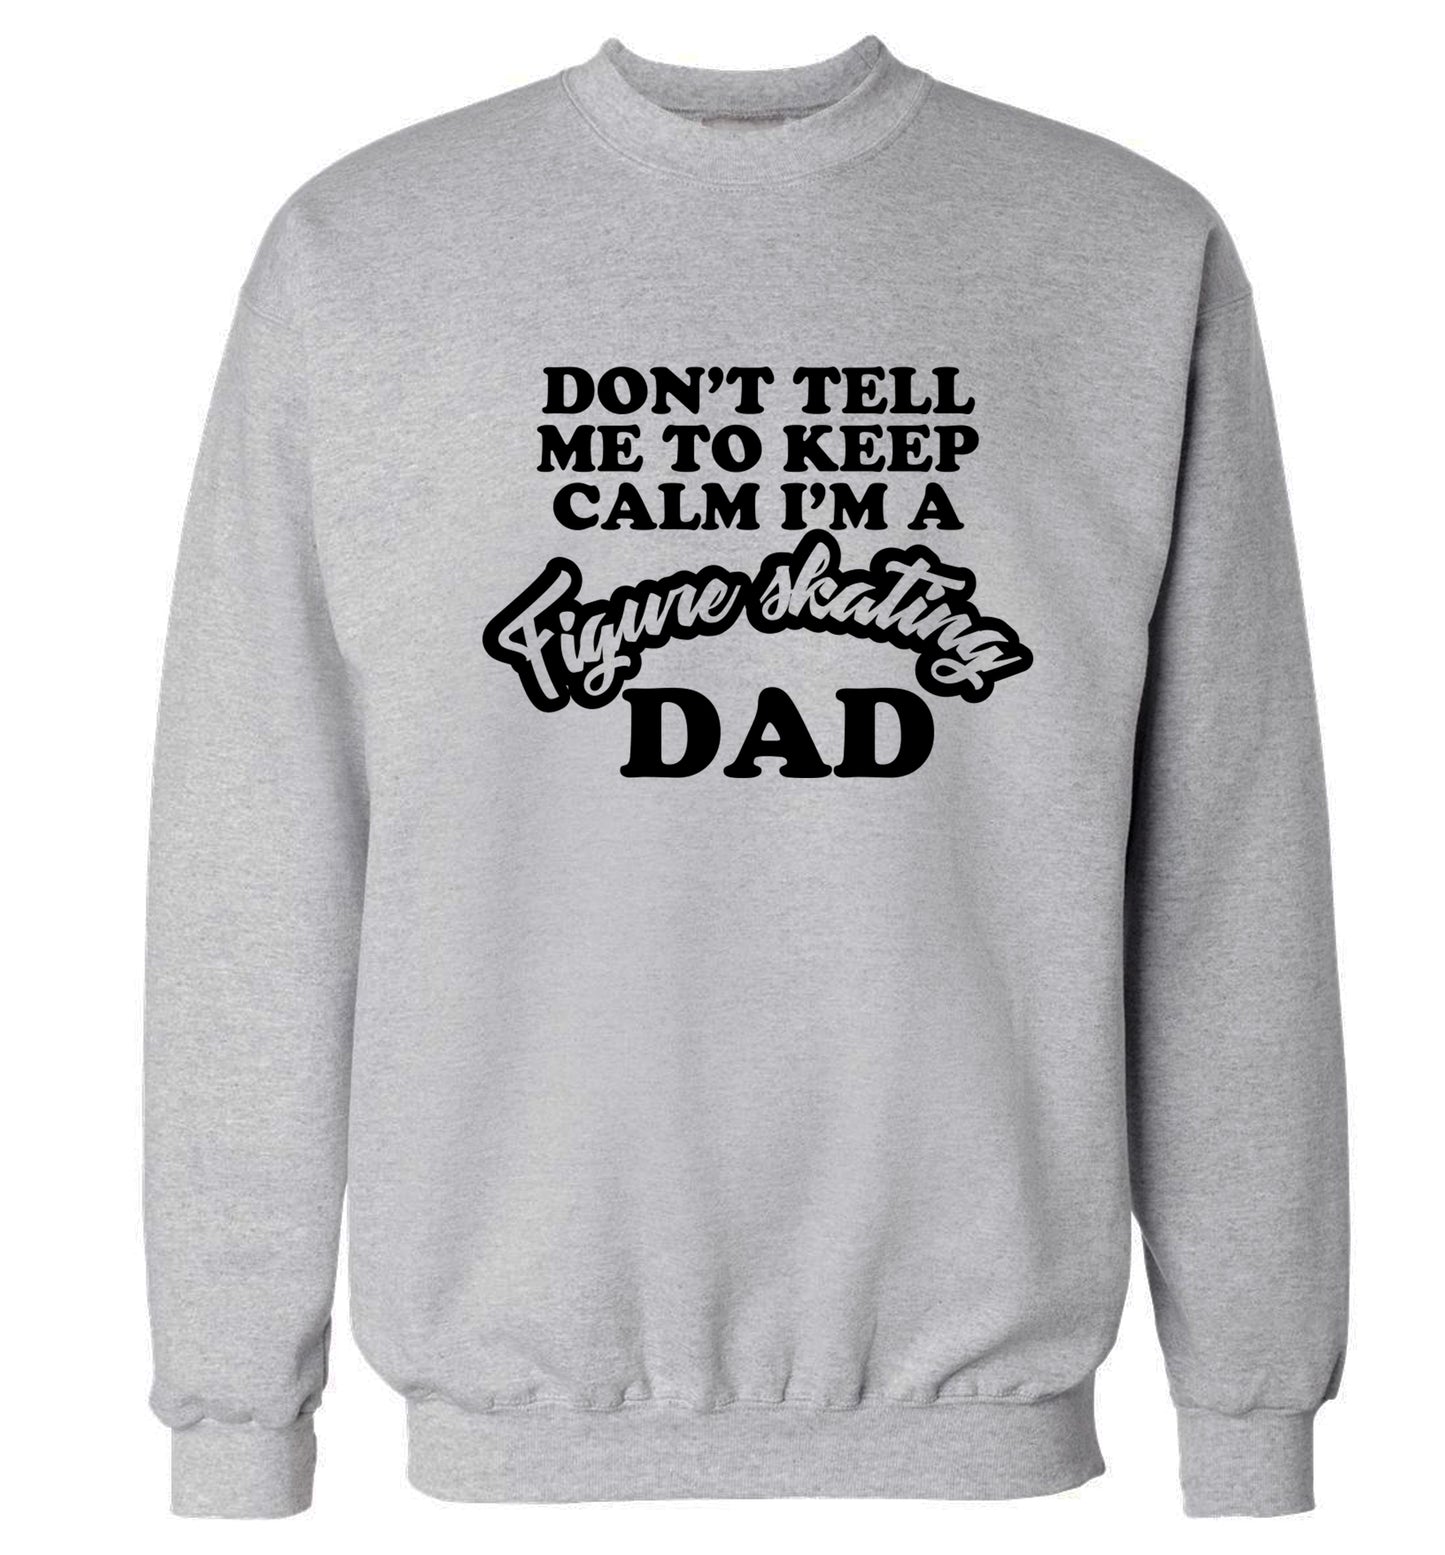 Don't tell me to keep calm I'm a figure skating dad Adult's unisexgrey Sweater 2XL